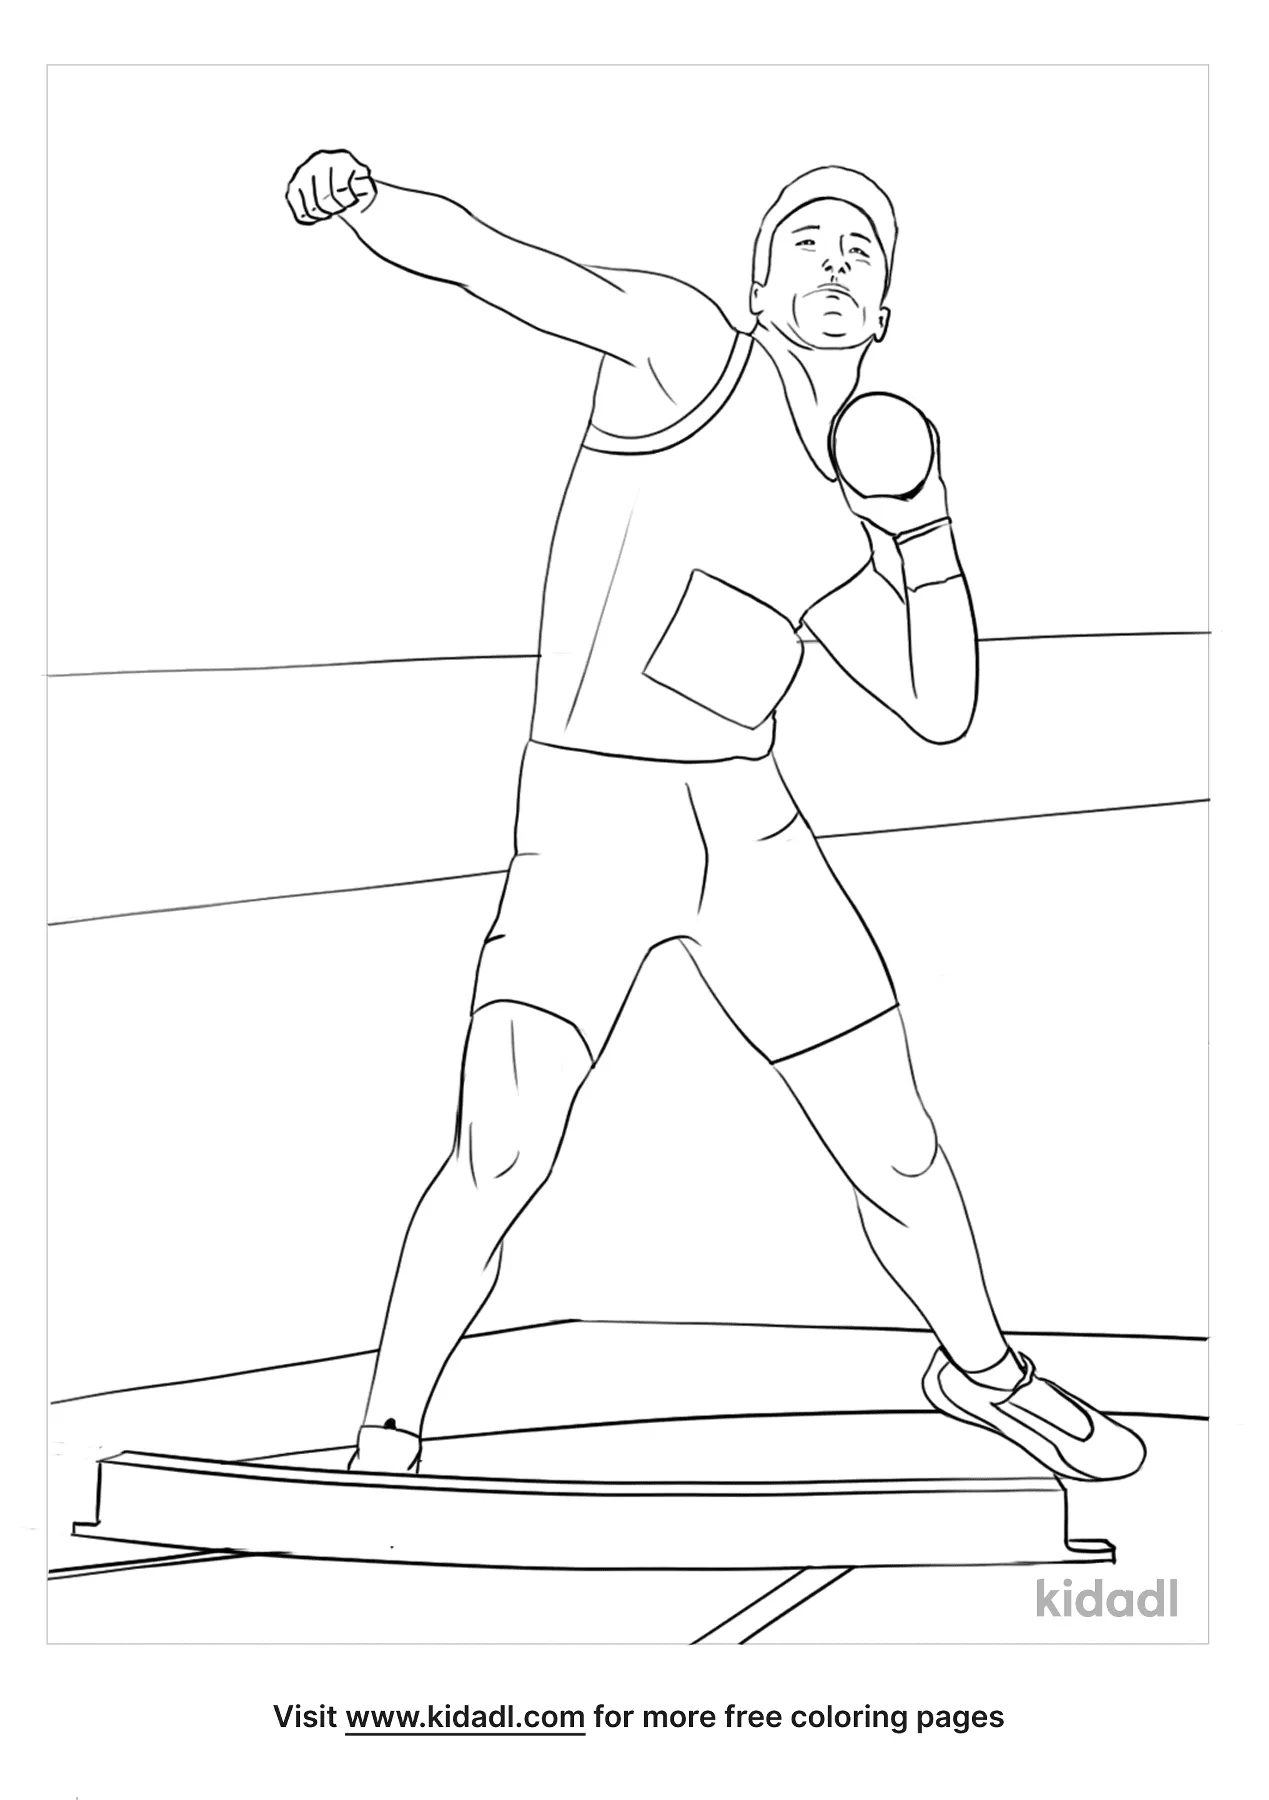 Track And Field Coloring Page